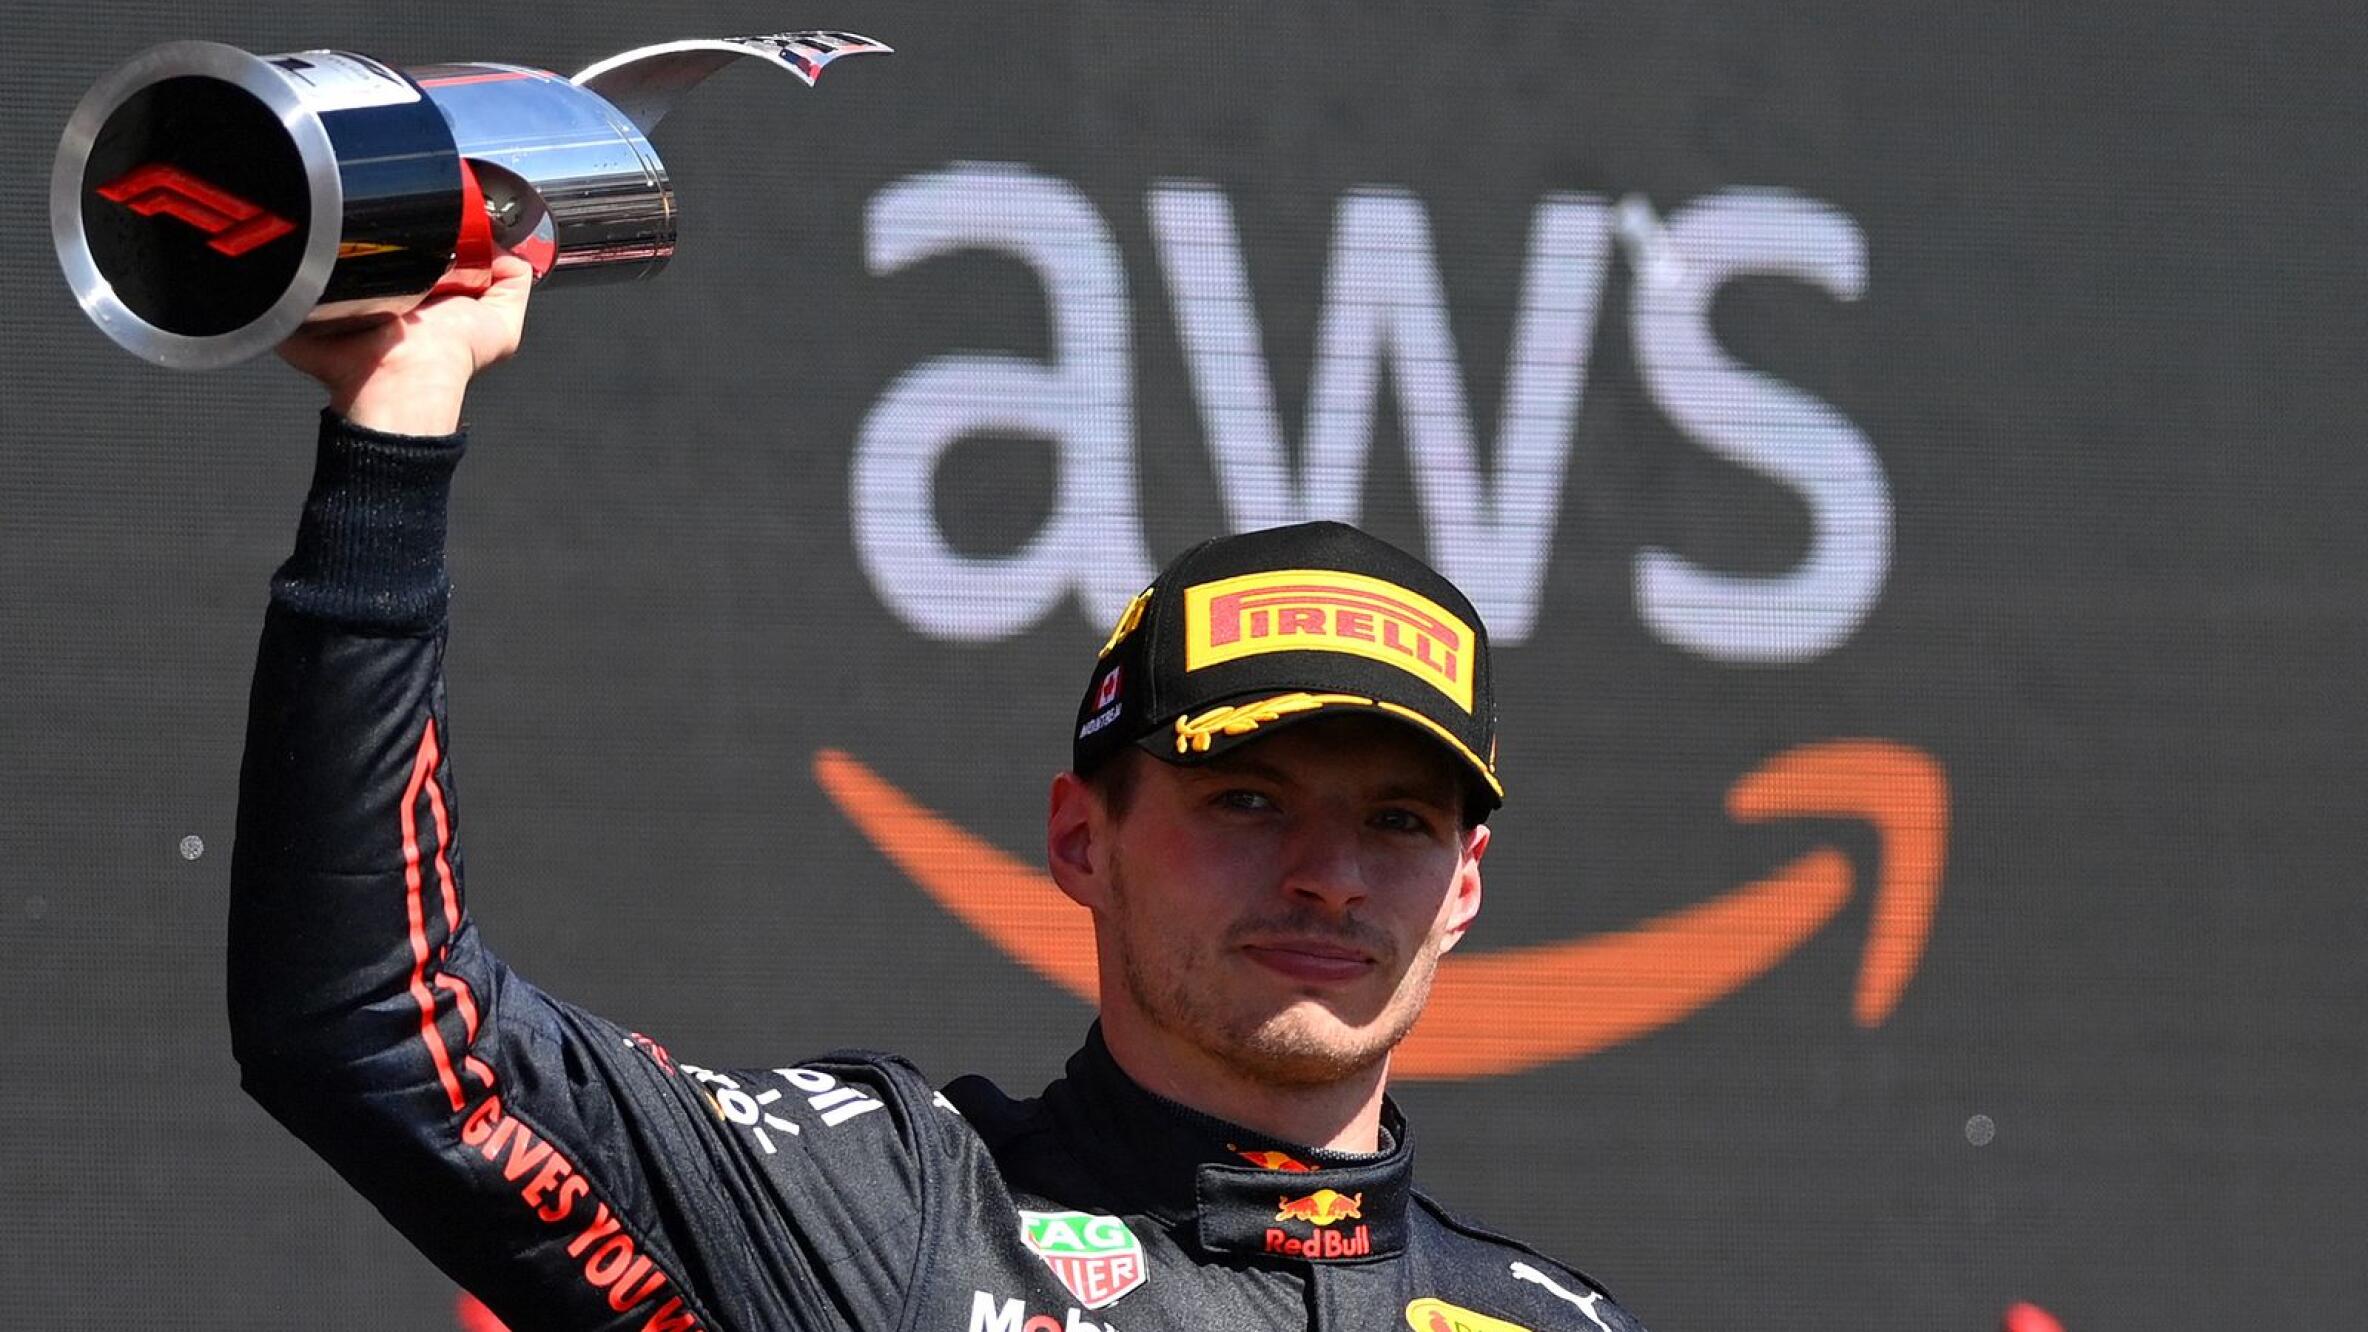 Race winner Max Verstappen of the Netherlands and Oracle Red Bull Racing celebrates on the podium after the F1 Grand Prix of Canada at Circuit Gilles Villeneuve in Montreal, Quebec on Sunday